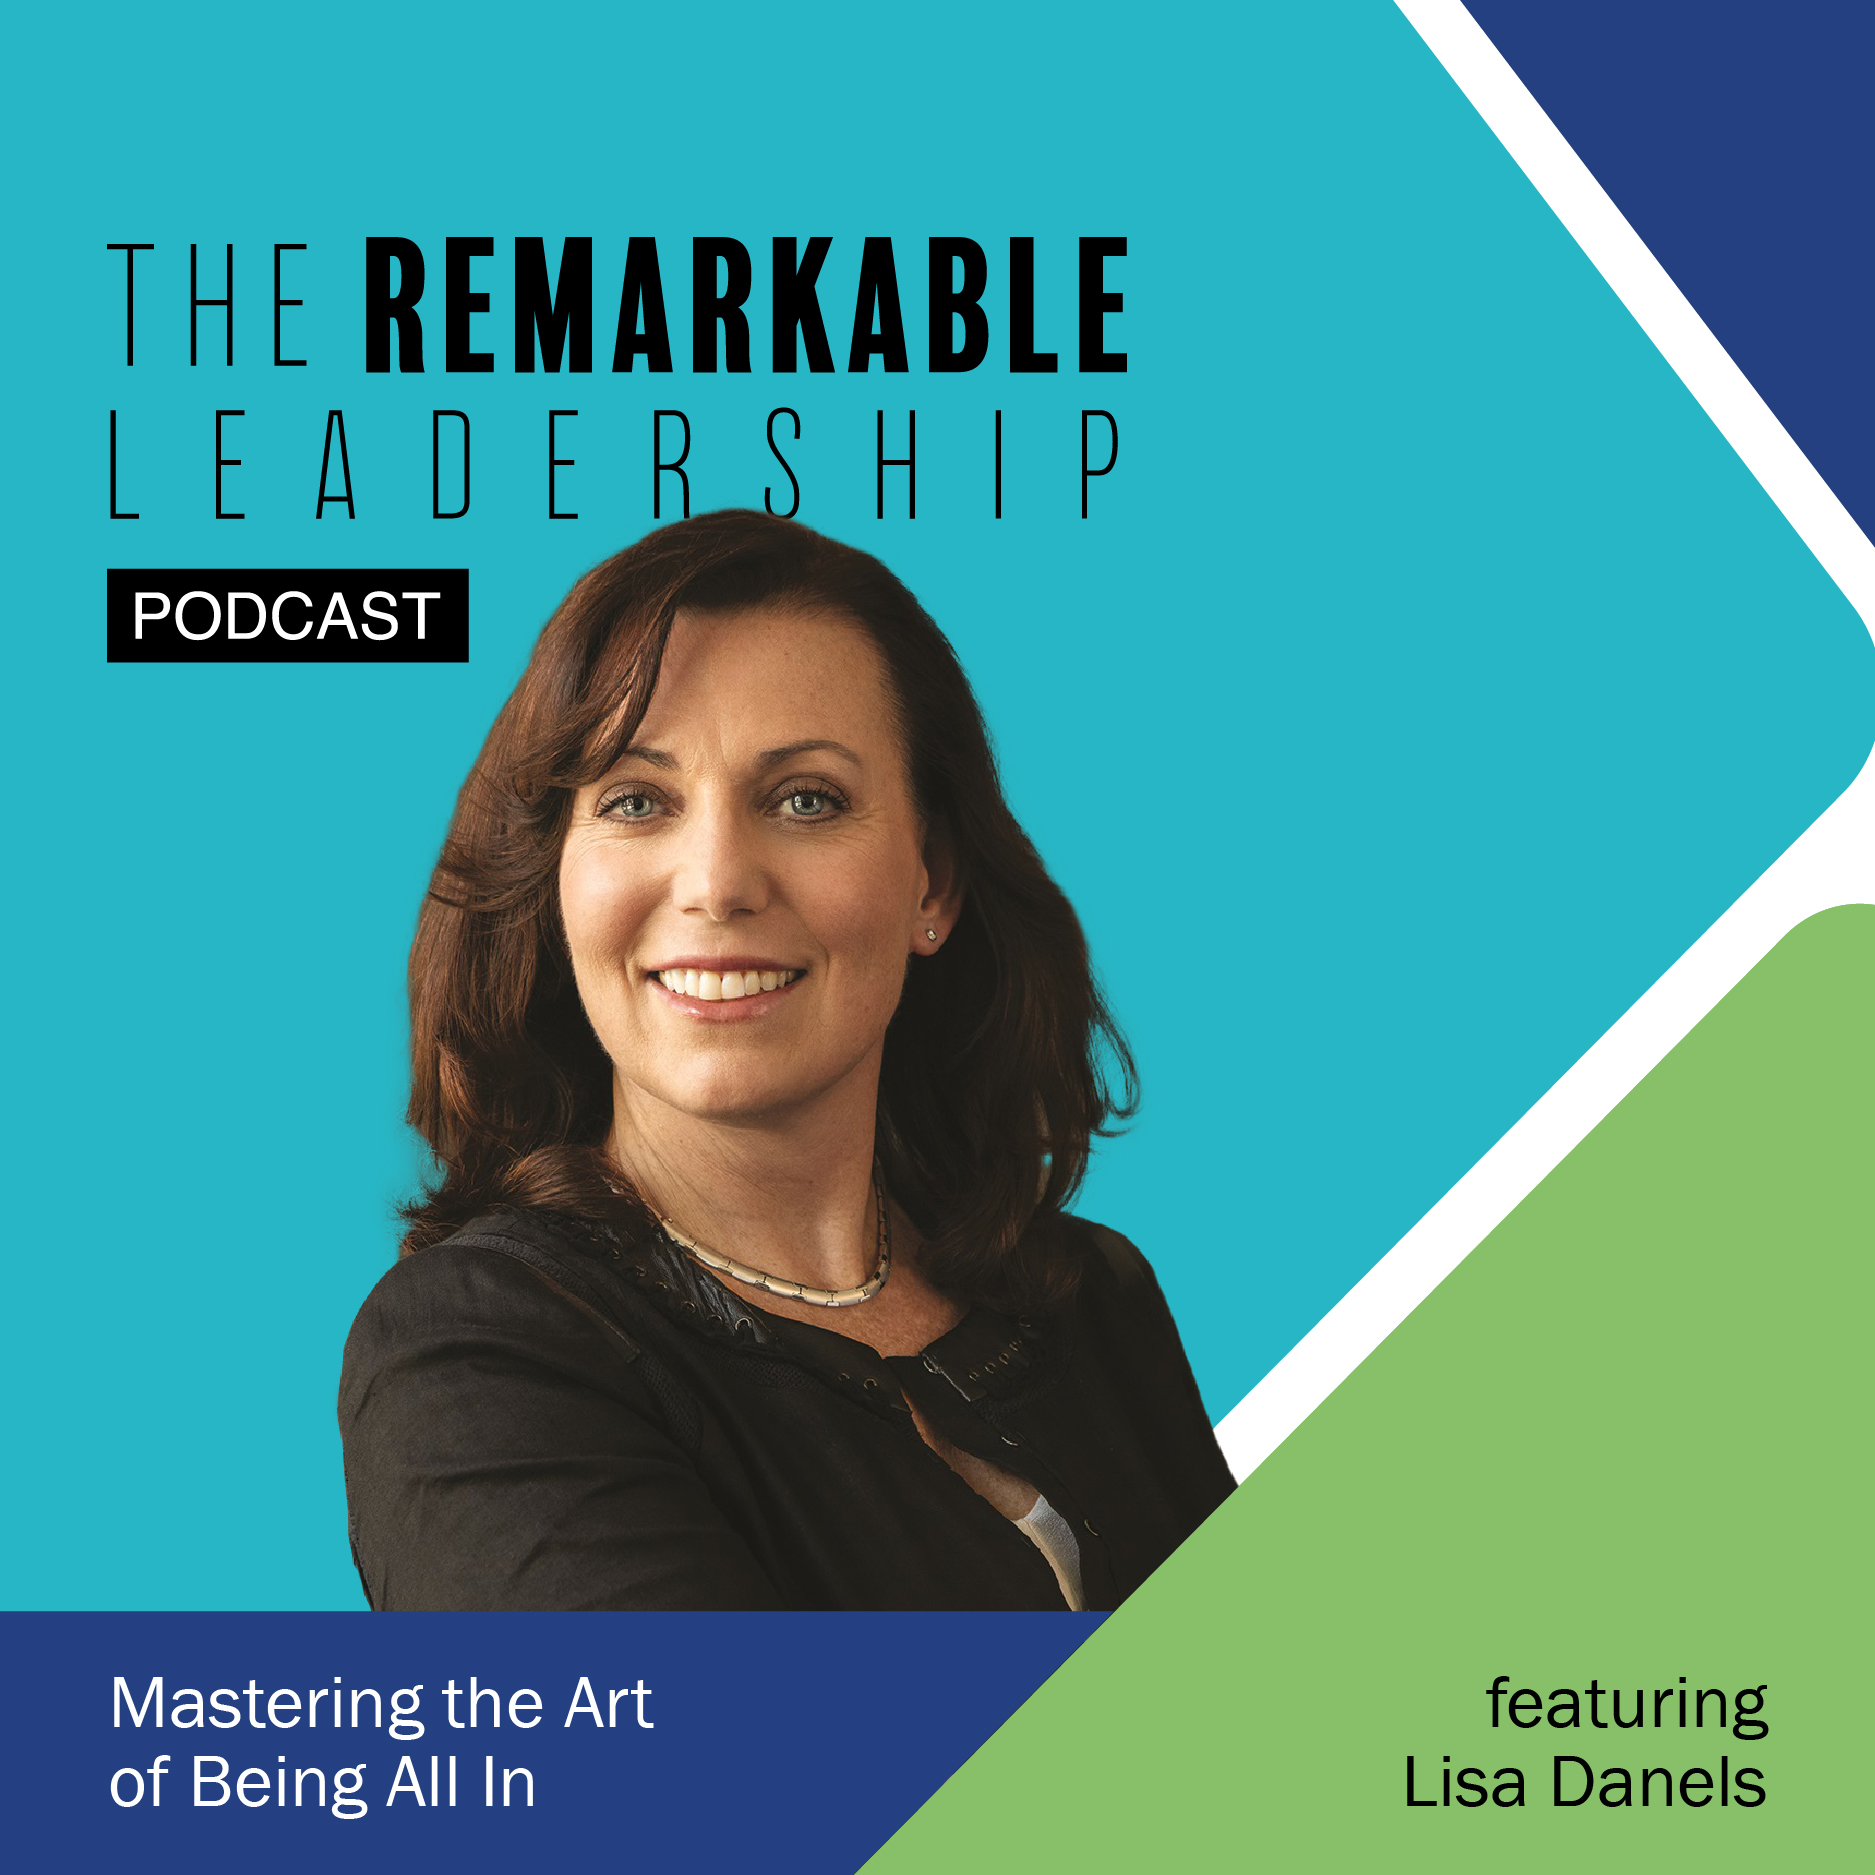 Mastering the Art of Being All In with Lisa Danels